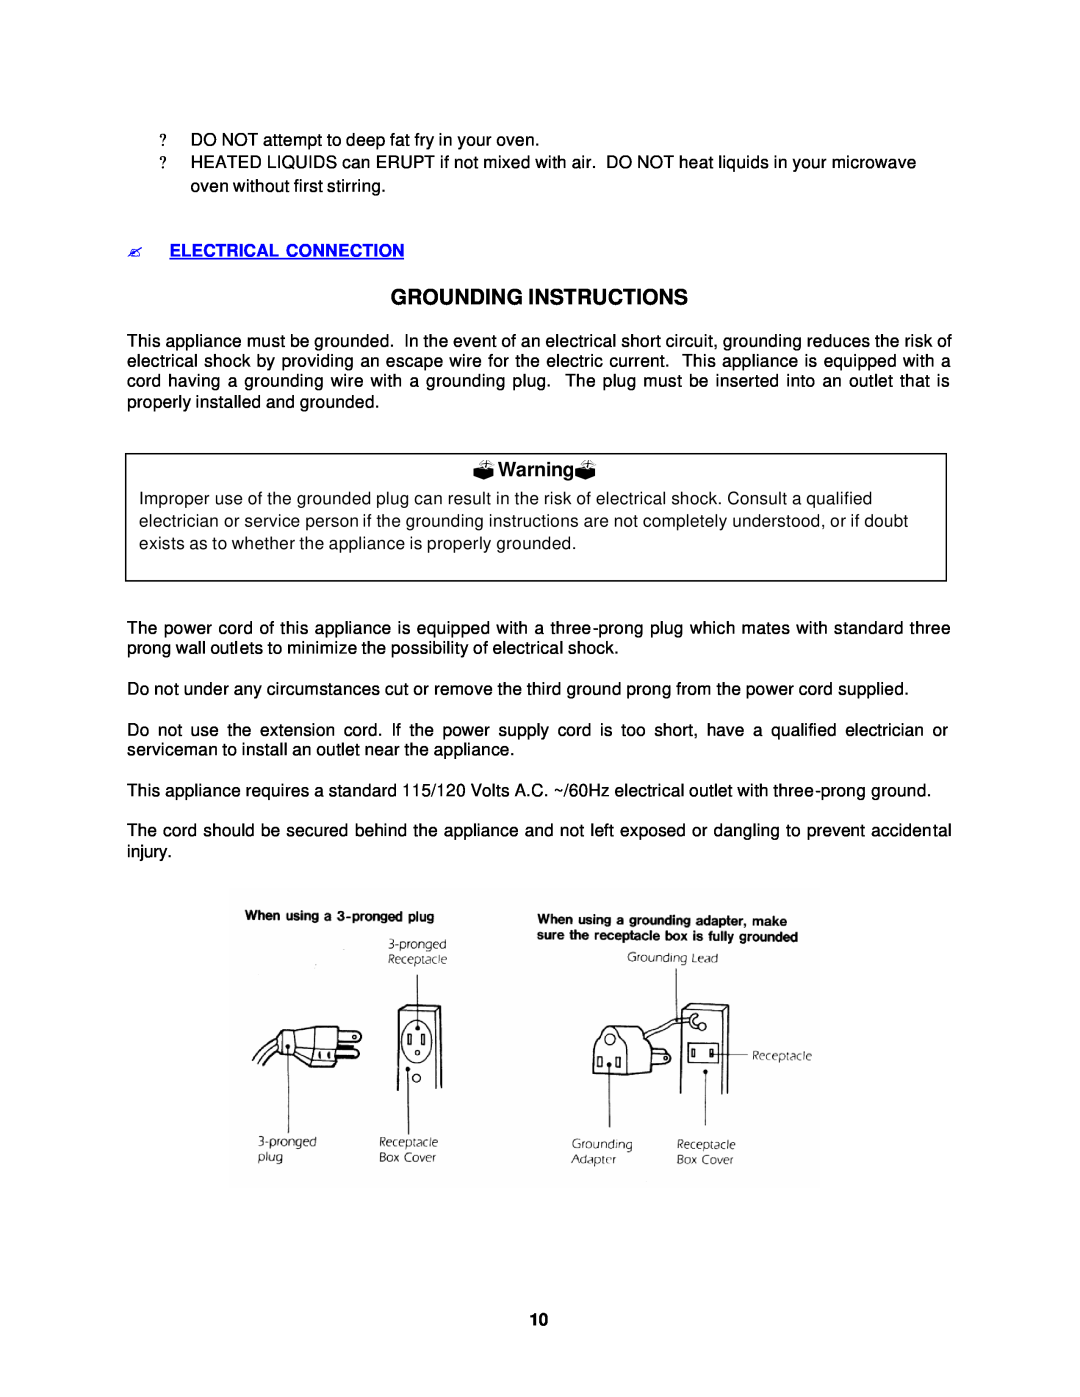 Avanti MO1400SST instruction manual Grounding Instructions, ?Warning?, ?Electrical Connection 